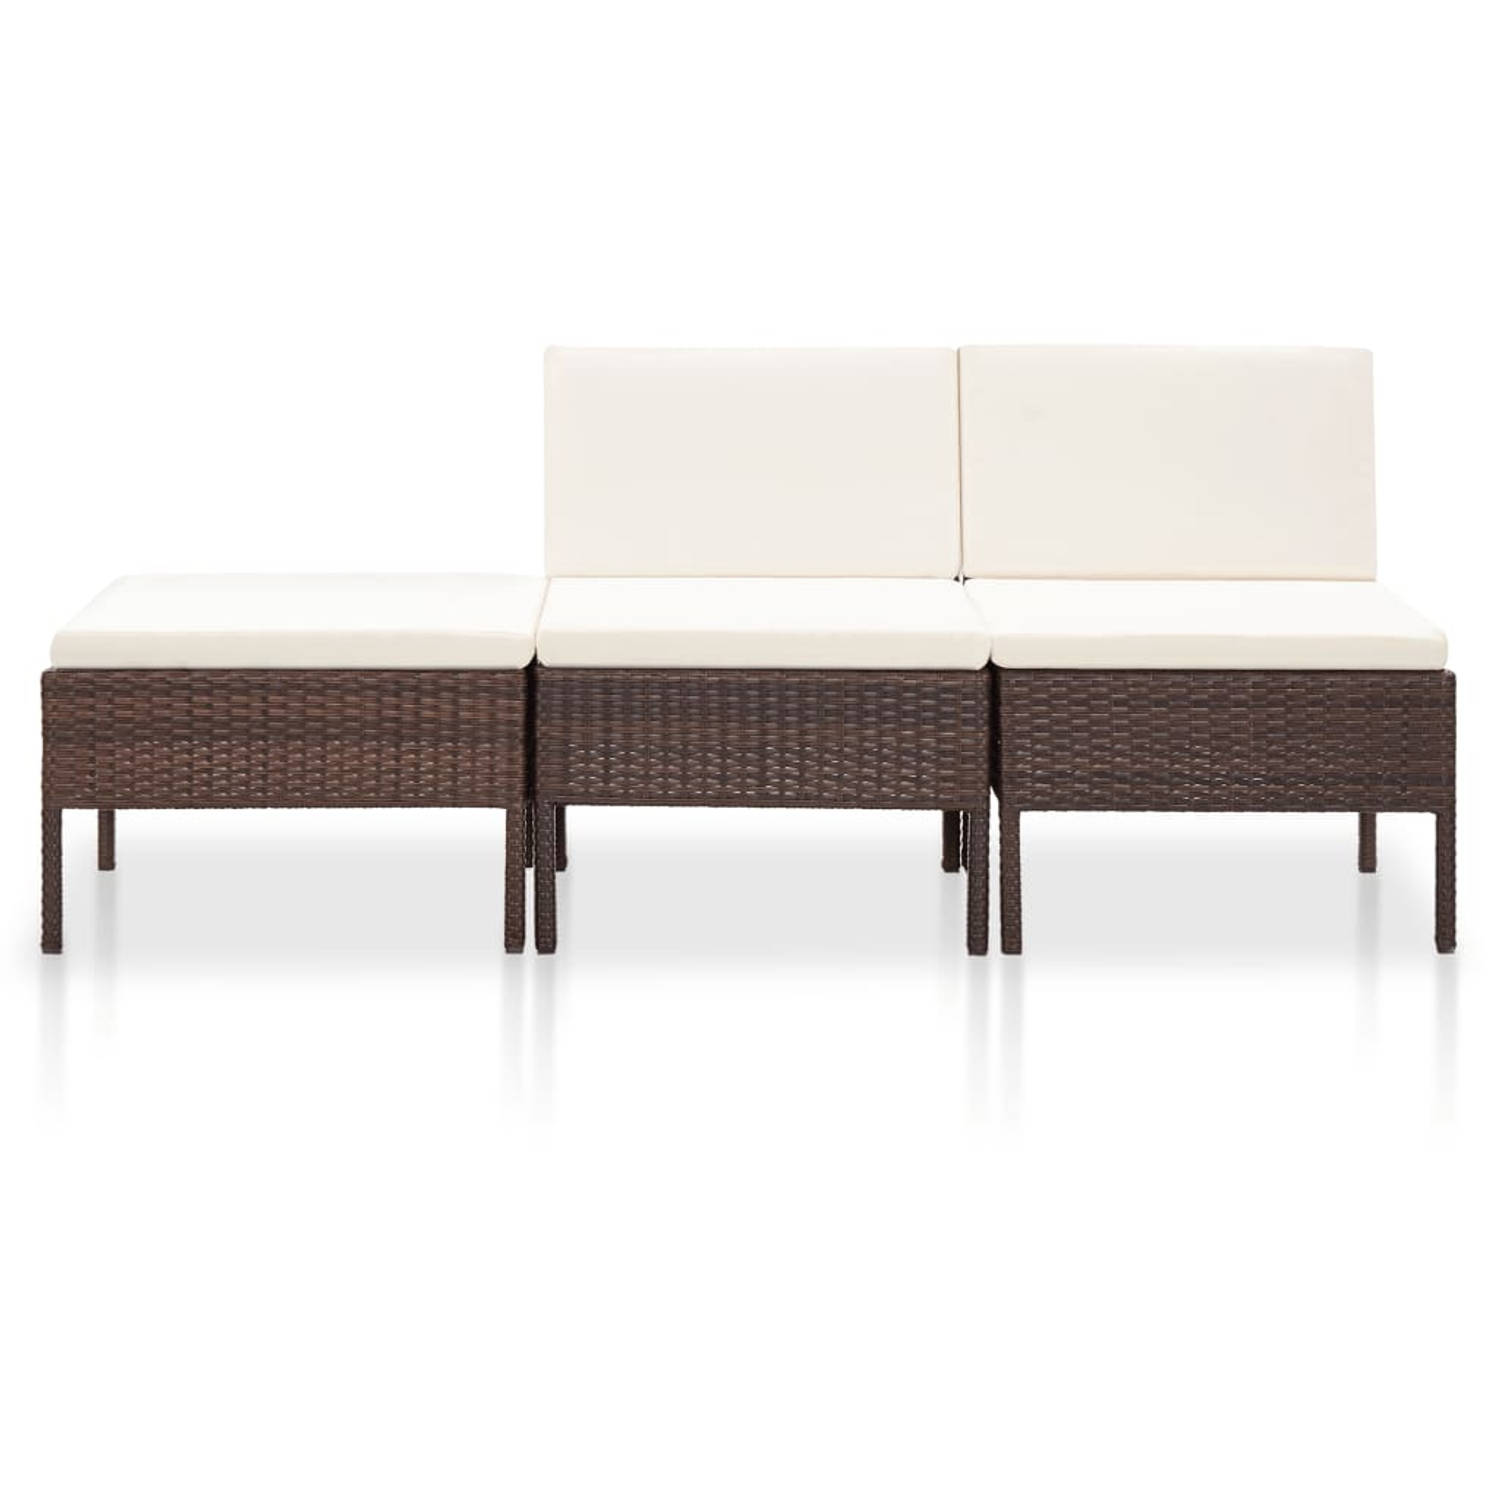 The Living Store Loungeset Modulair - PE-rattan - Bruin - 57 x 69 x 67 cm - Inclusief kussens - The Living Store